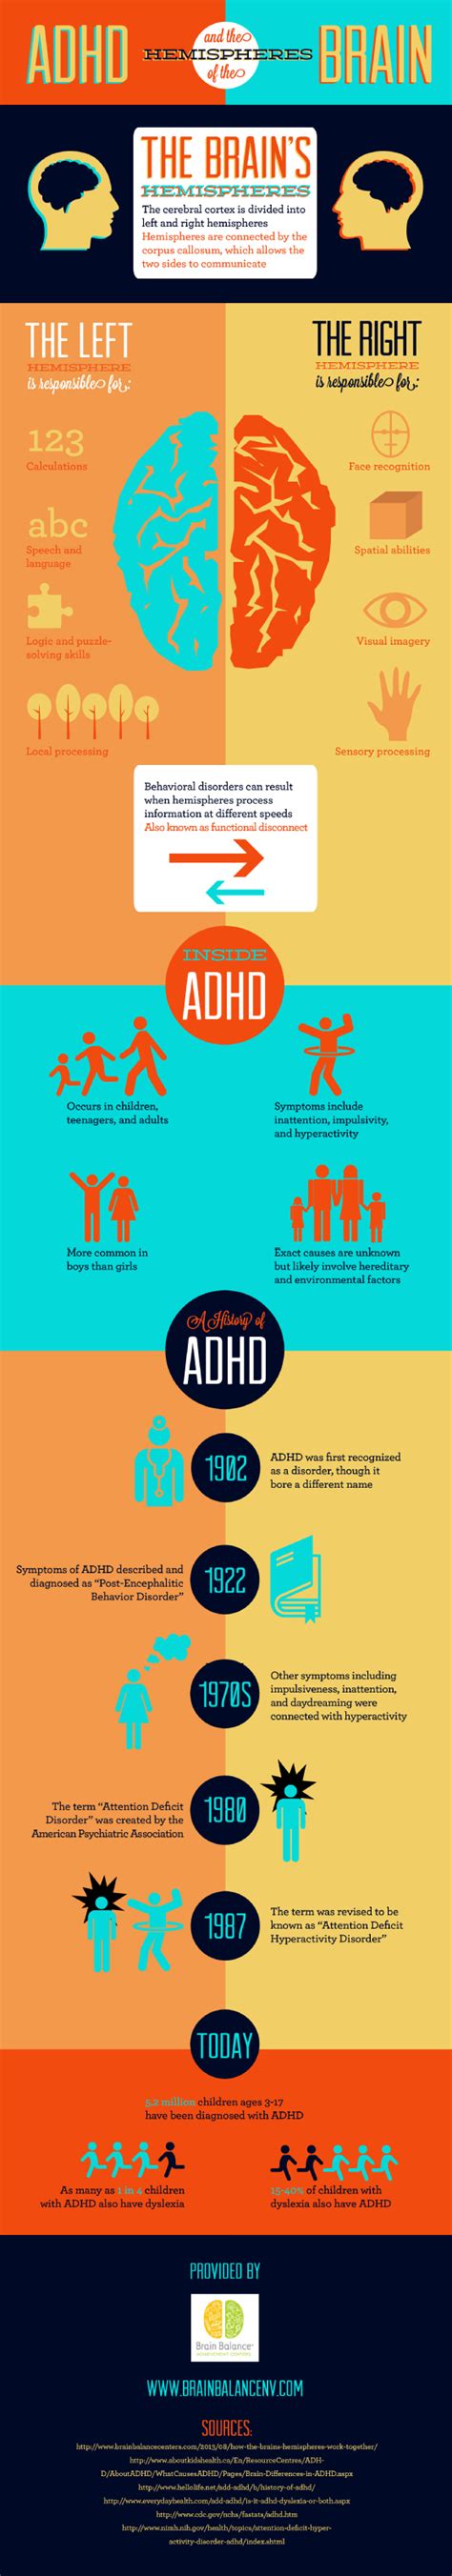 Adhd Brain Adhd Brain Food New Ebook And Free Infographic Heres